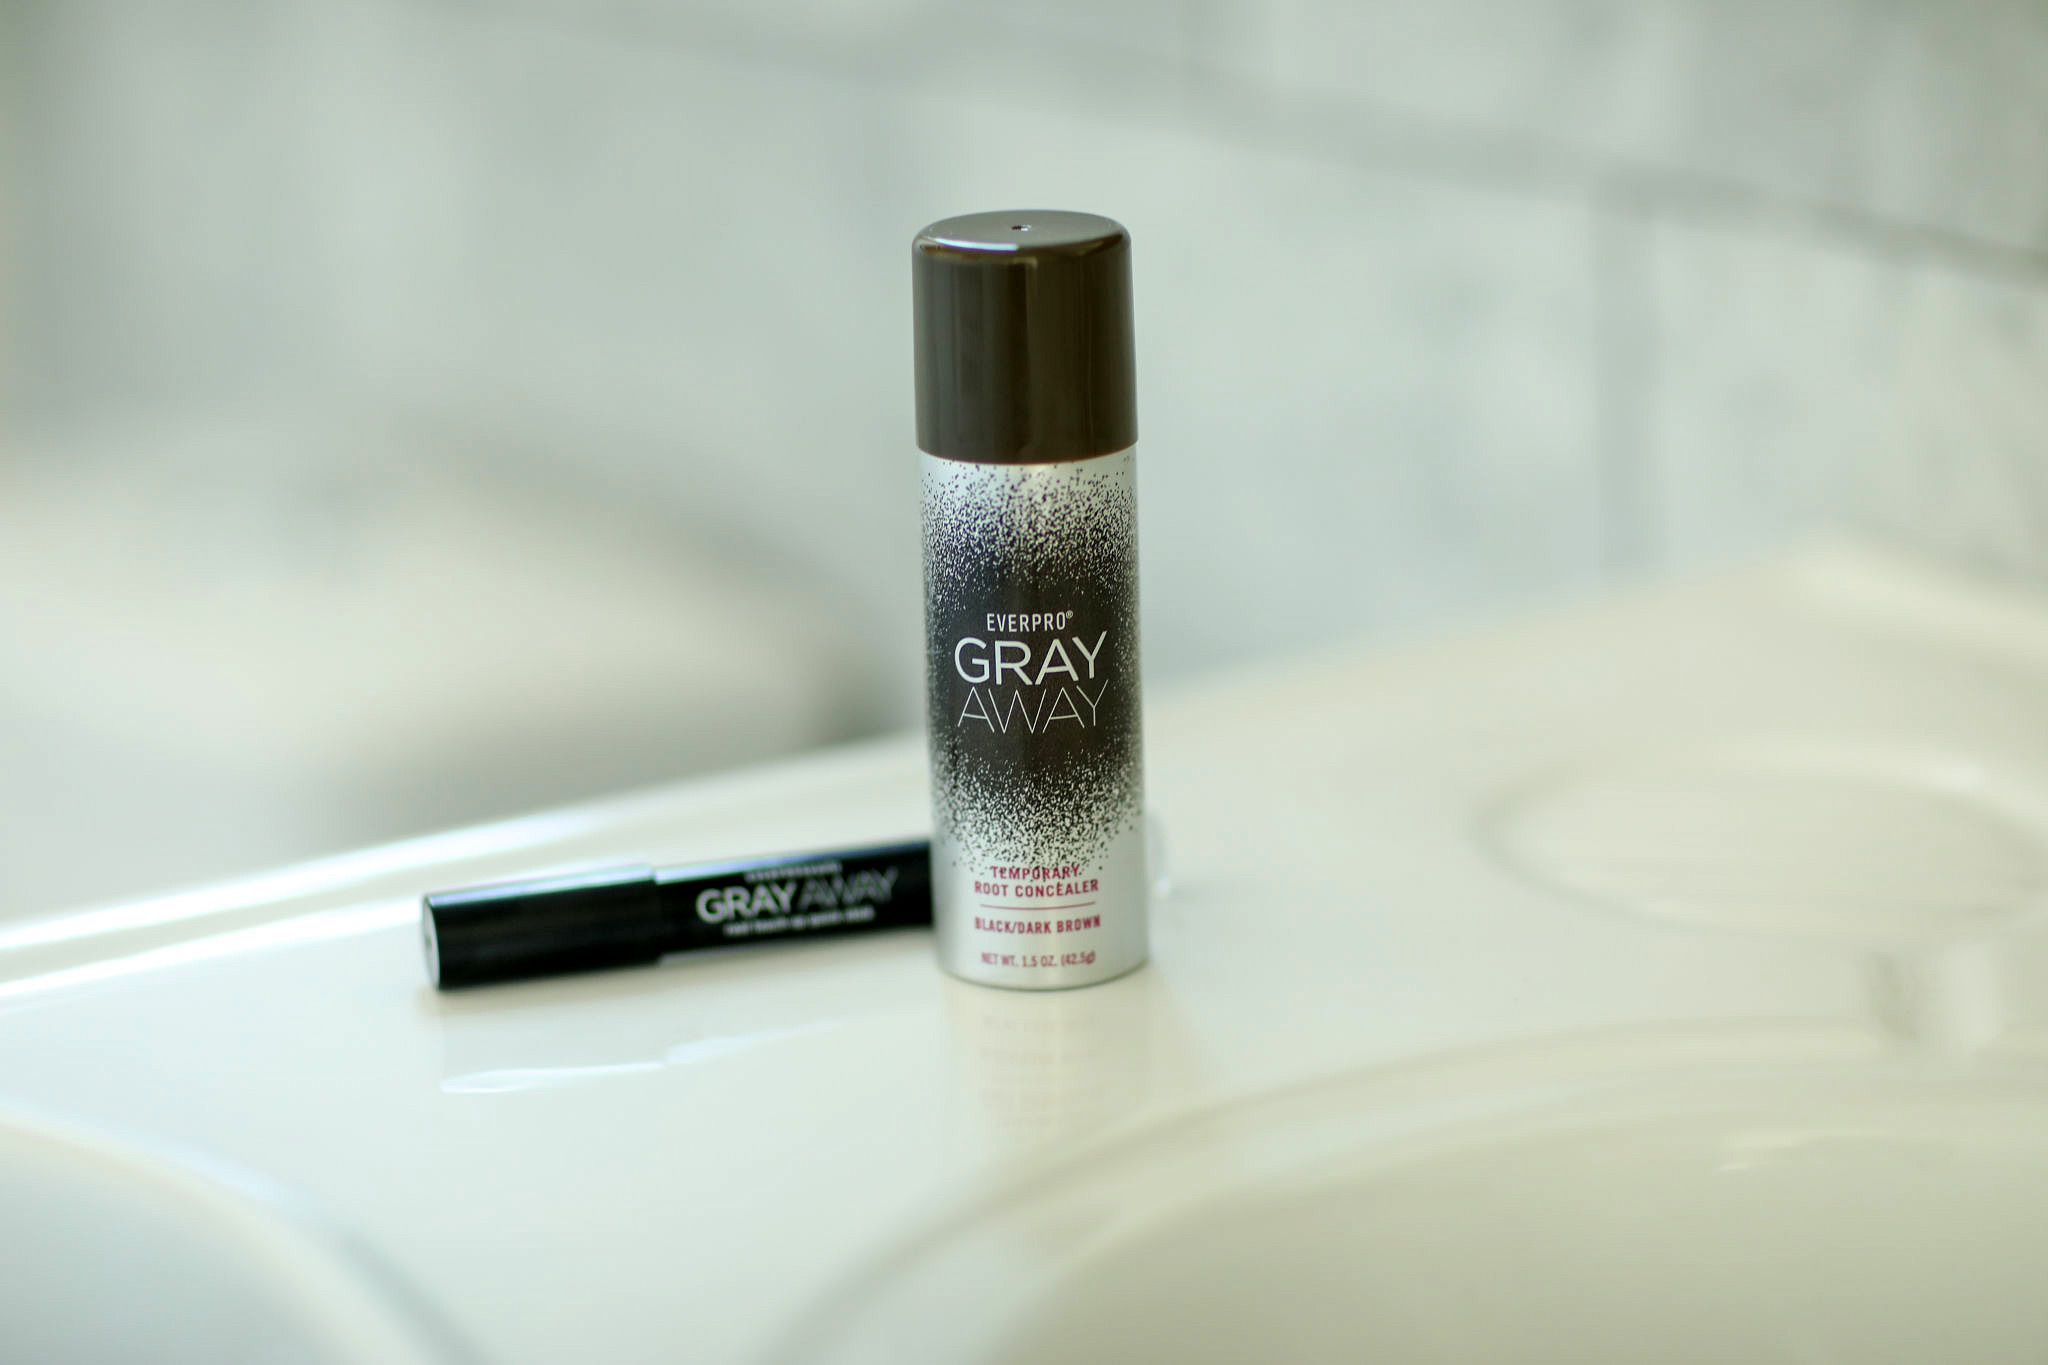 Want to cover those pesky gray hairs? Orange County Blogger Debbie Savage is sharing her top two ways to cover gray hairs like a pro. See them HERE!